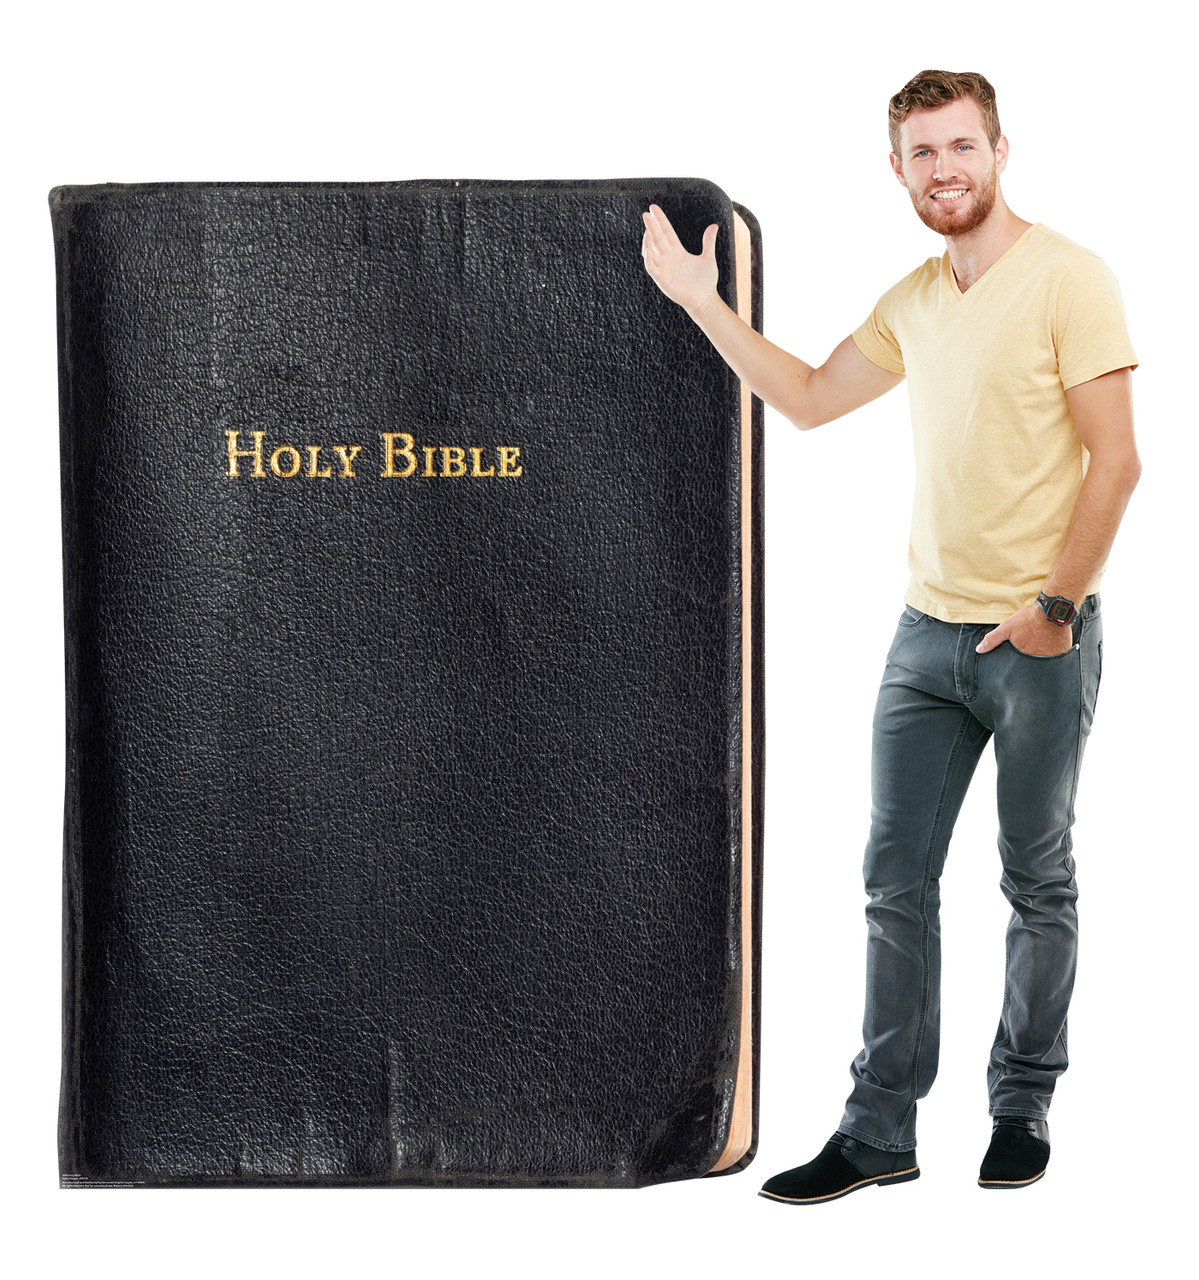 Life-size cardboard standee of The Holy Bible Lifesize